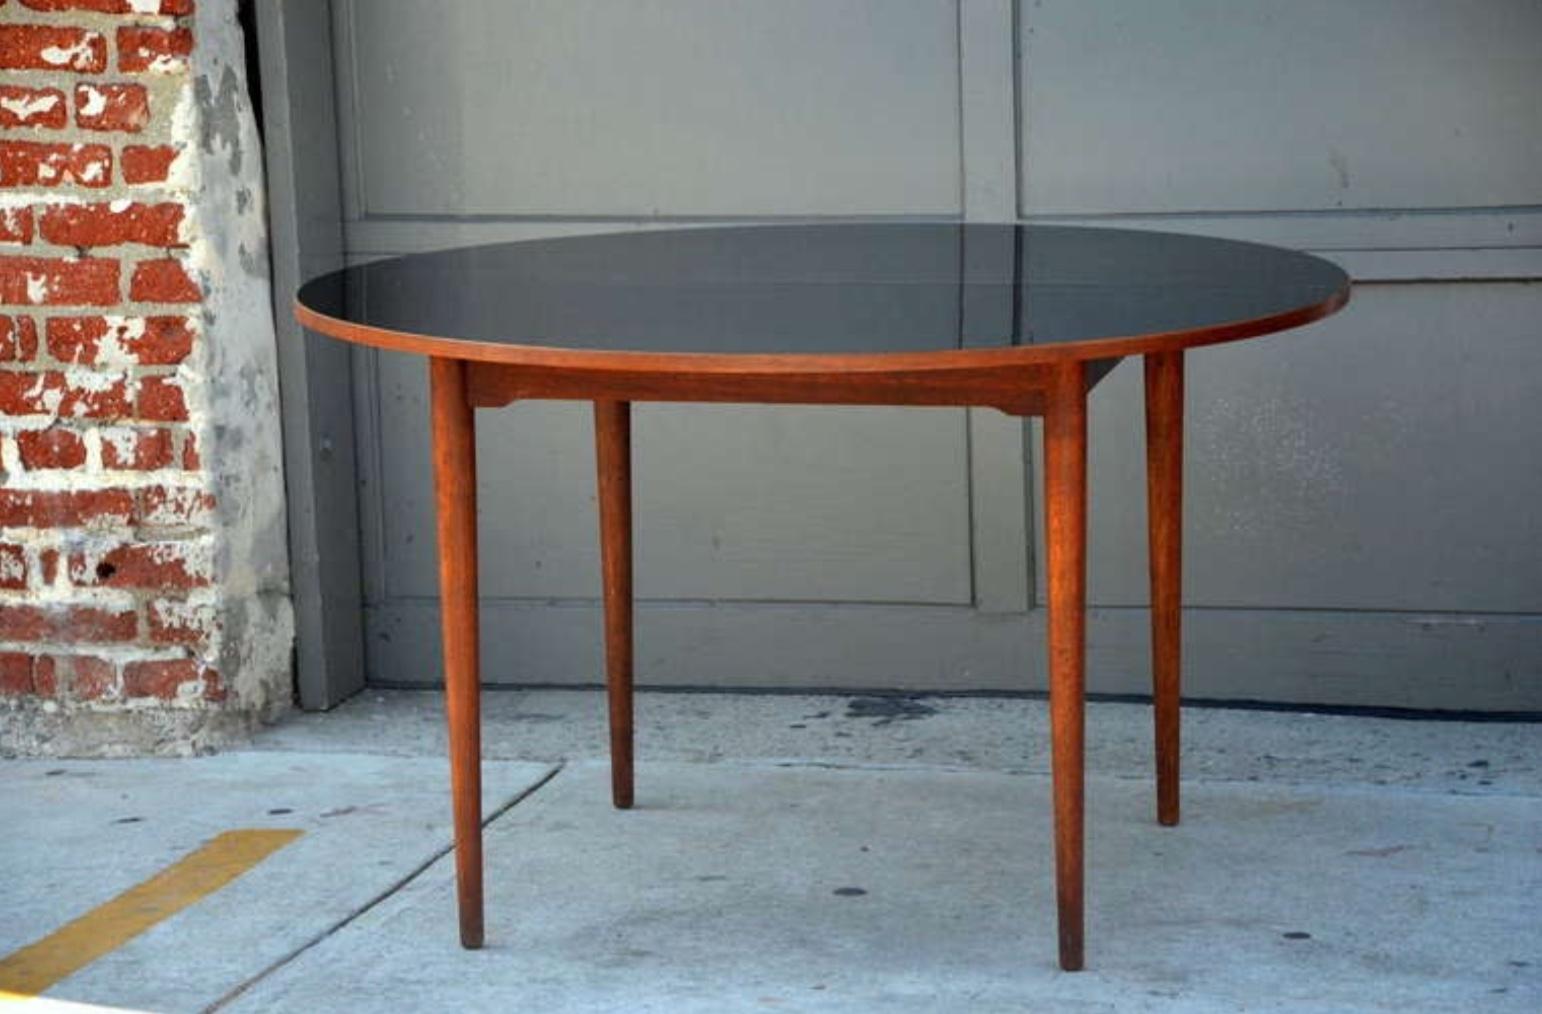 Chic Scandinavian teak table with durable black laminate top. Very well constructed and sturdy.